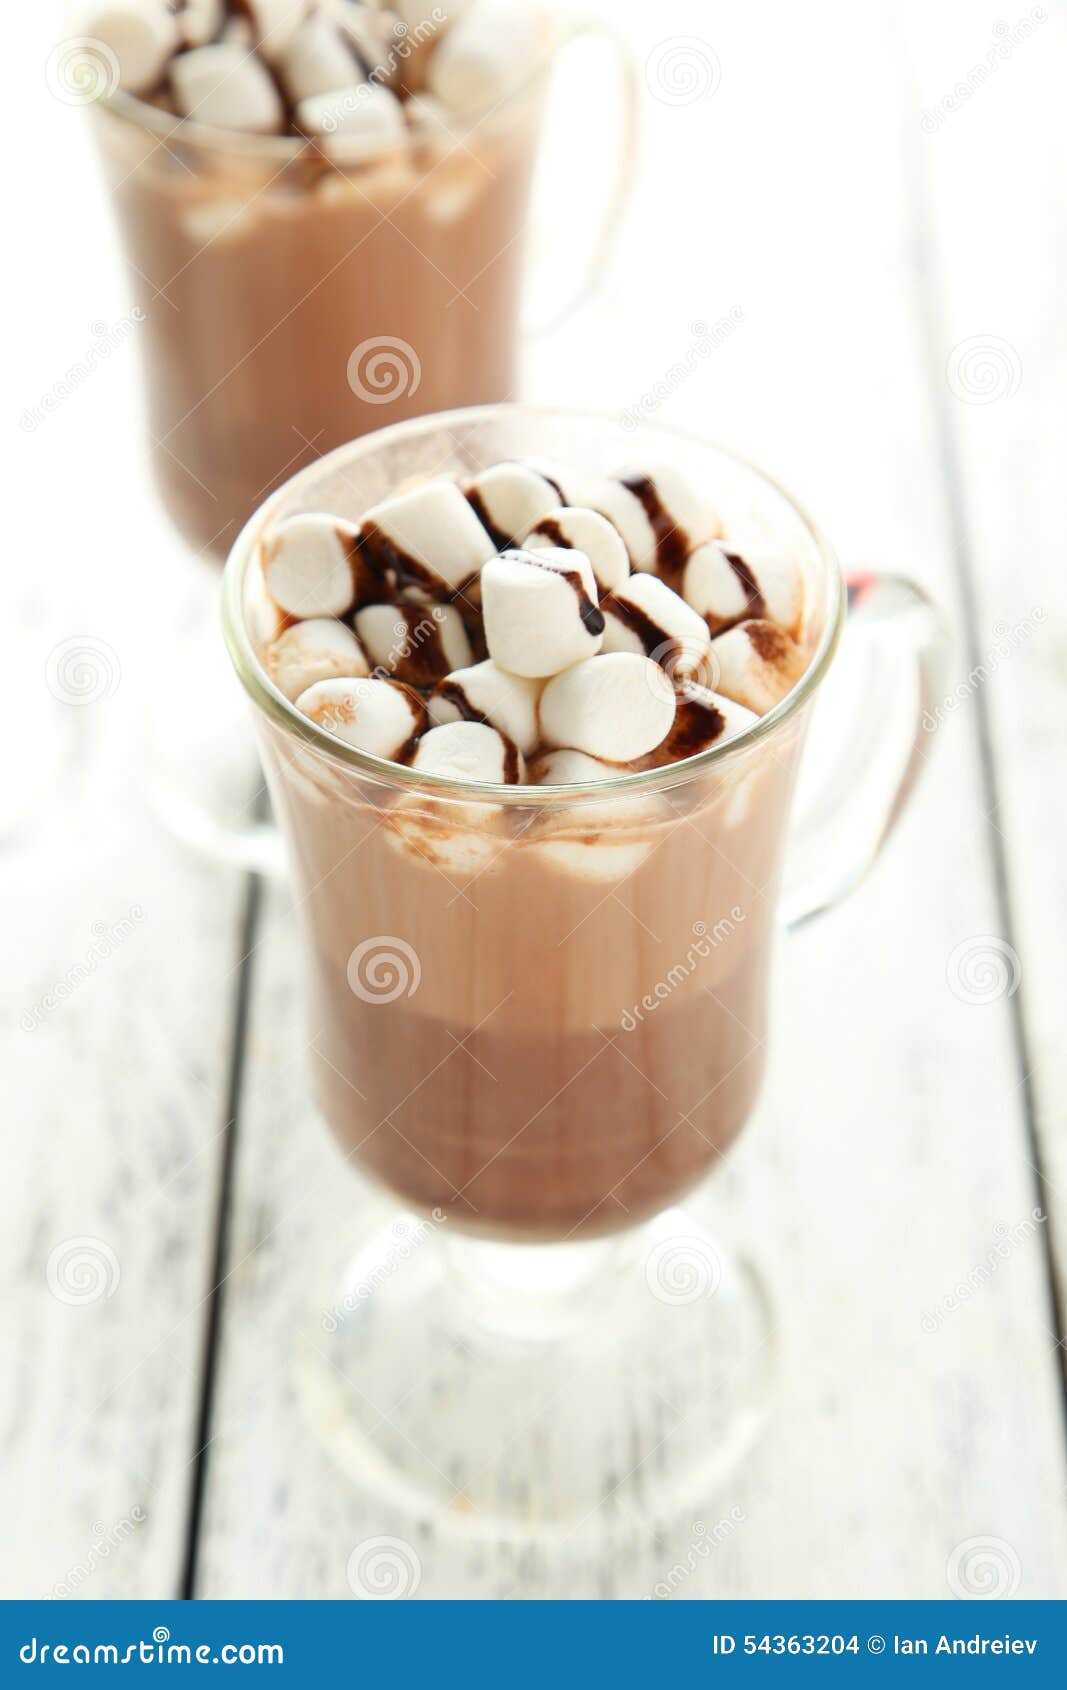 Glasses of hot chocolate stock photo. Image of dish, delights - 54363204